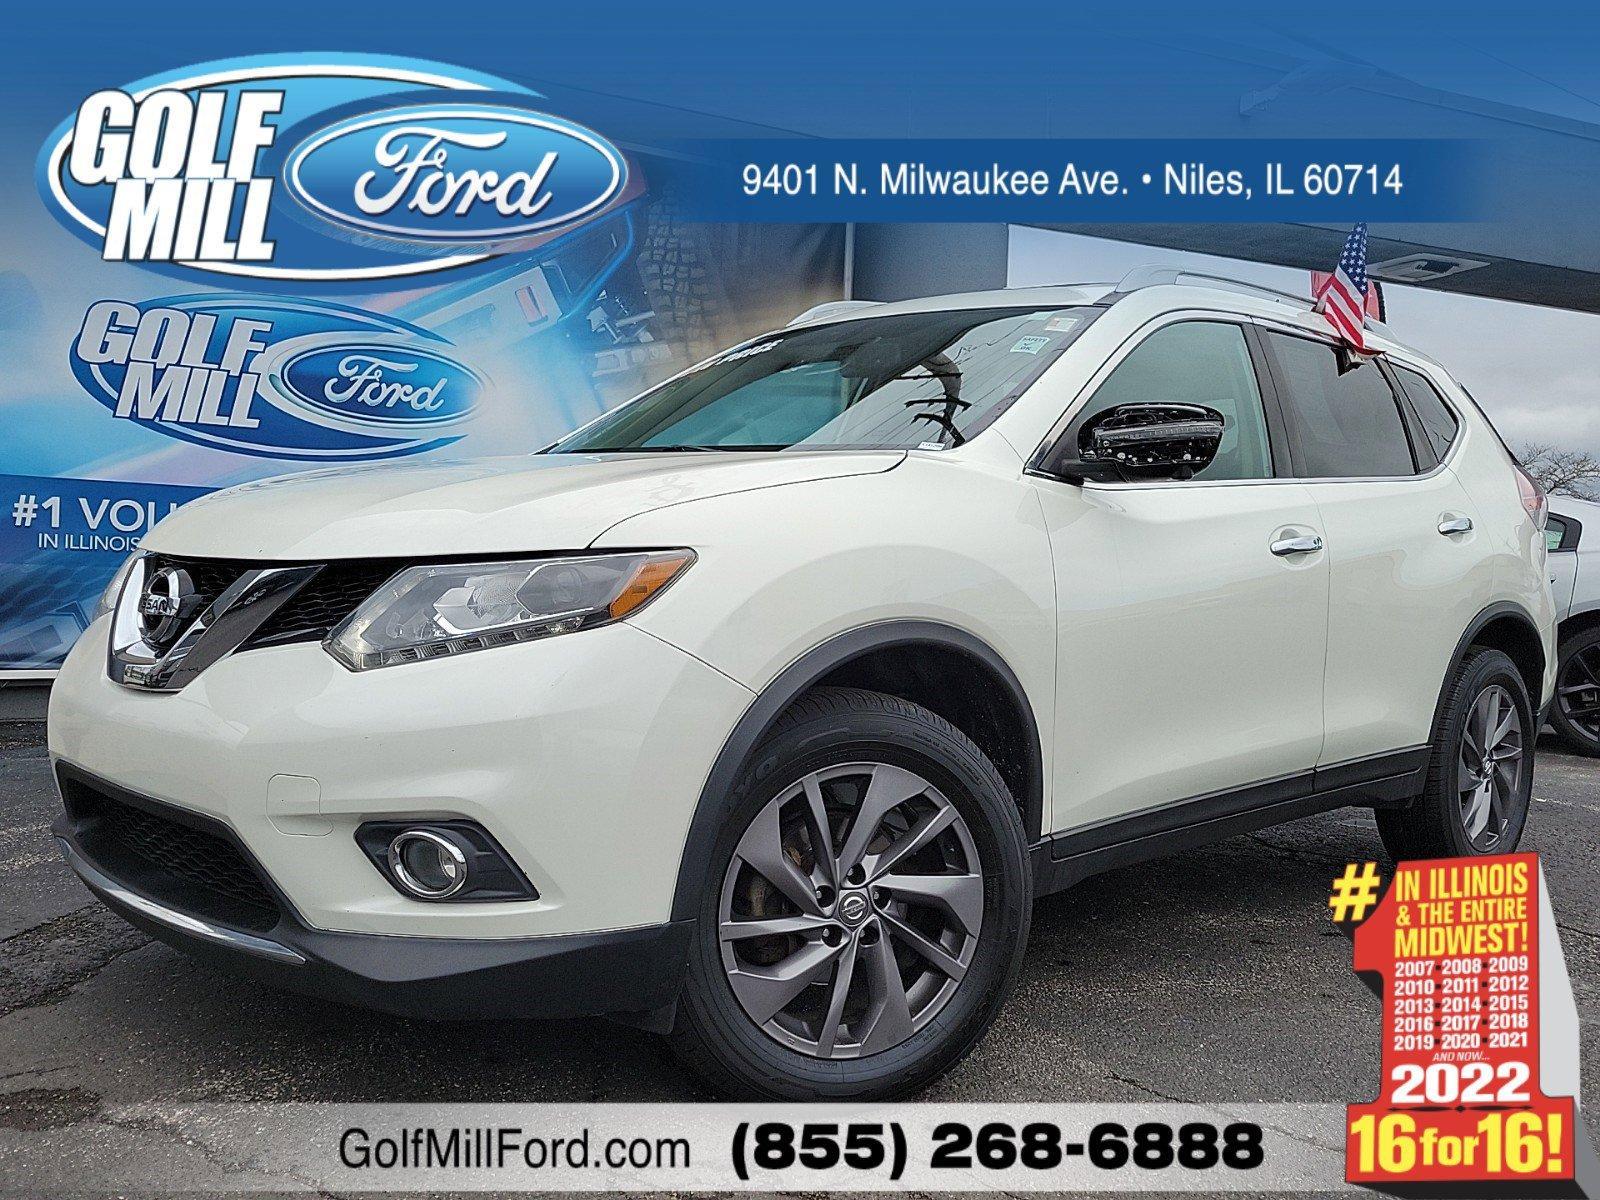 2016 Nissan Rogue Vehicle Photo in Plainfield, IL 60586